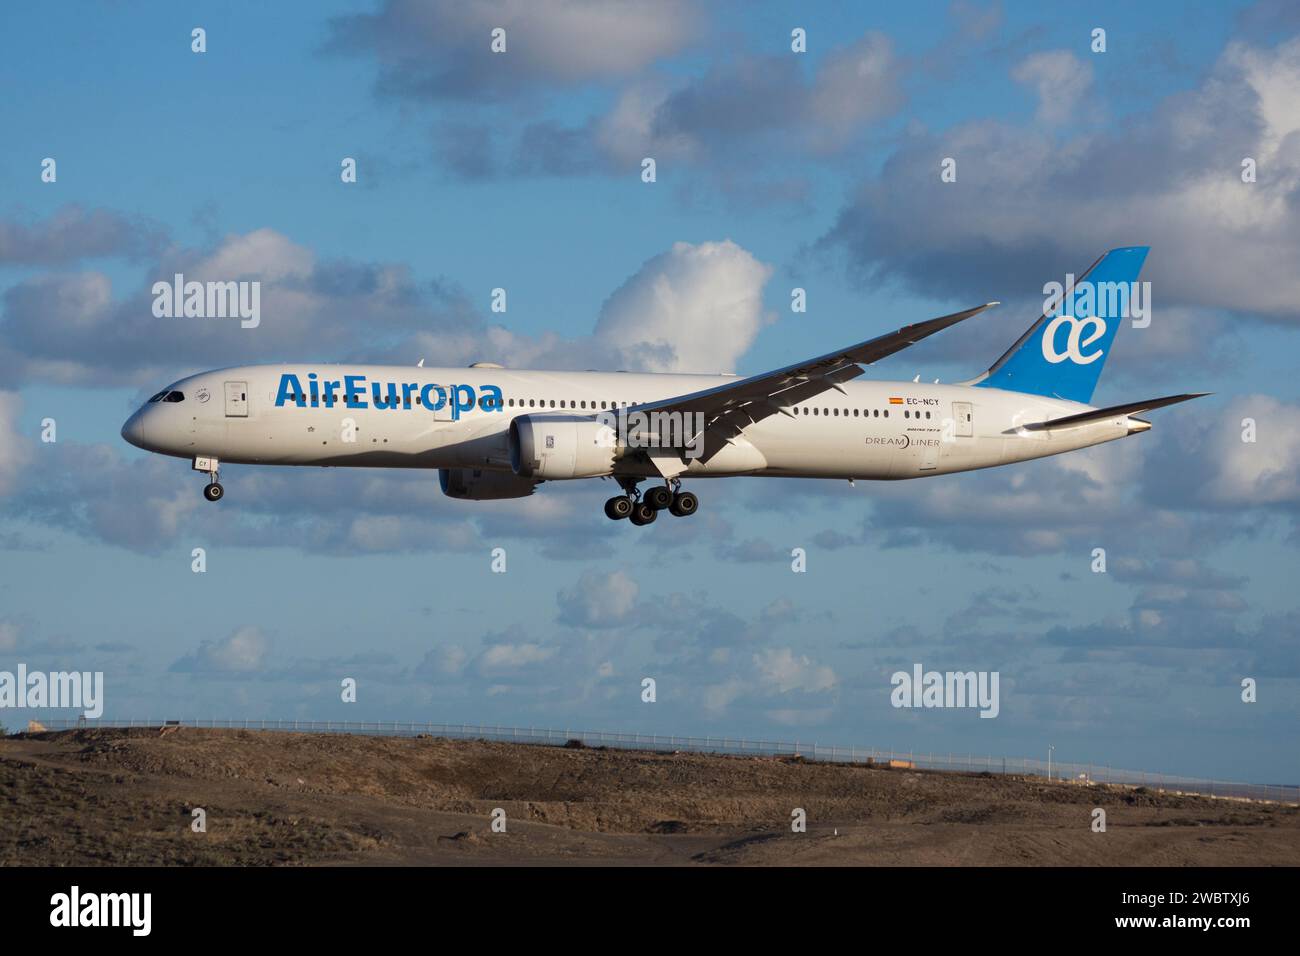 Boeing 787 long-haul airliner of the Air Europa airline Stock Photo